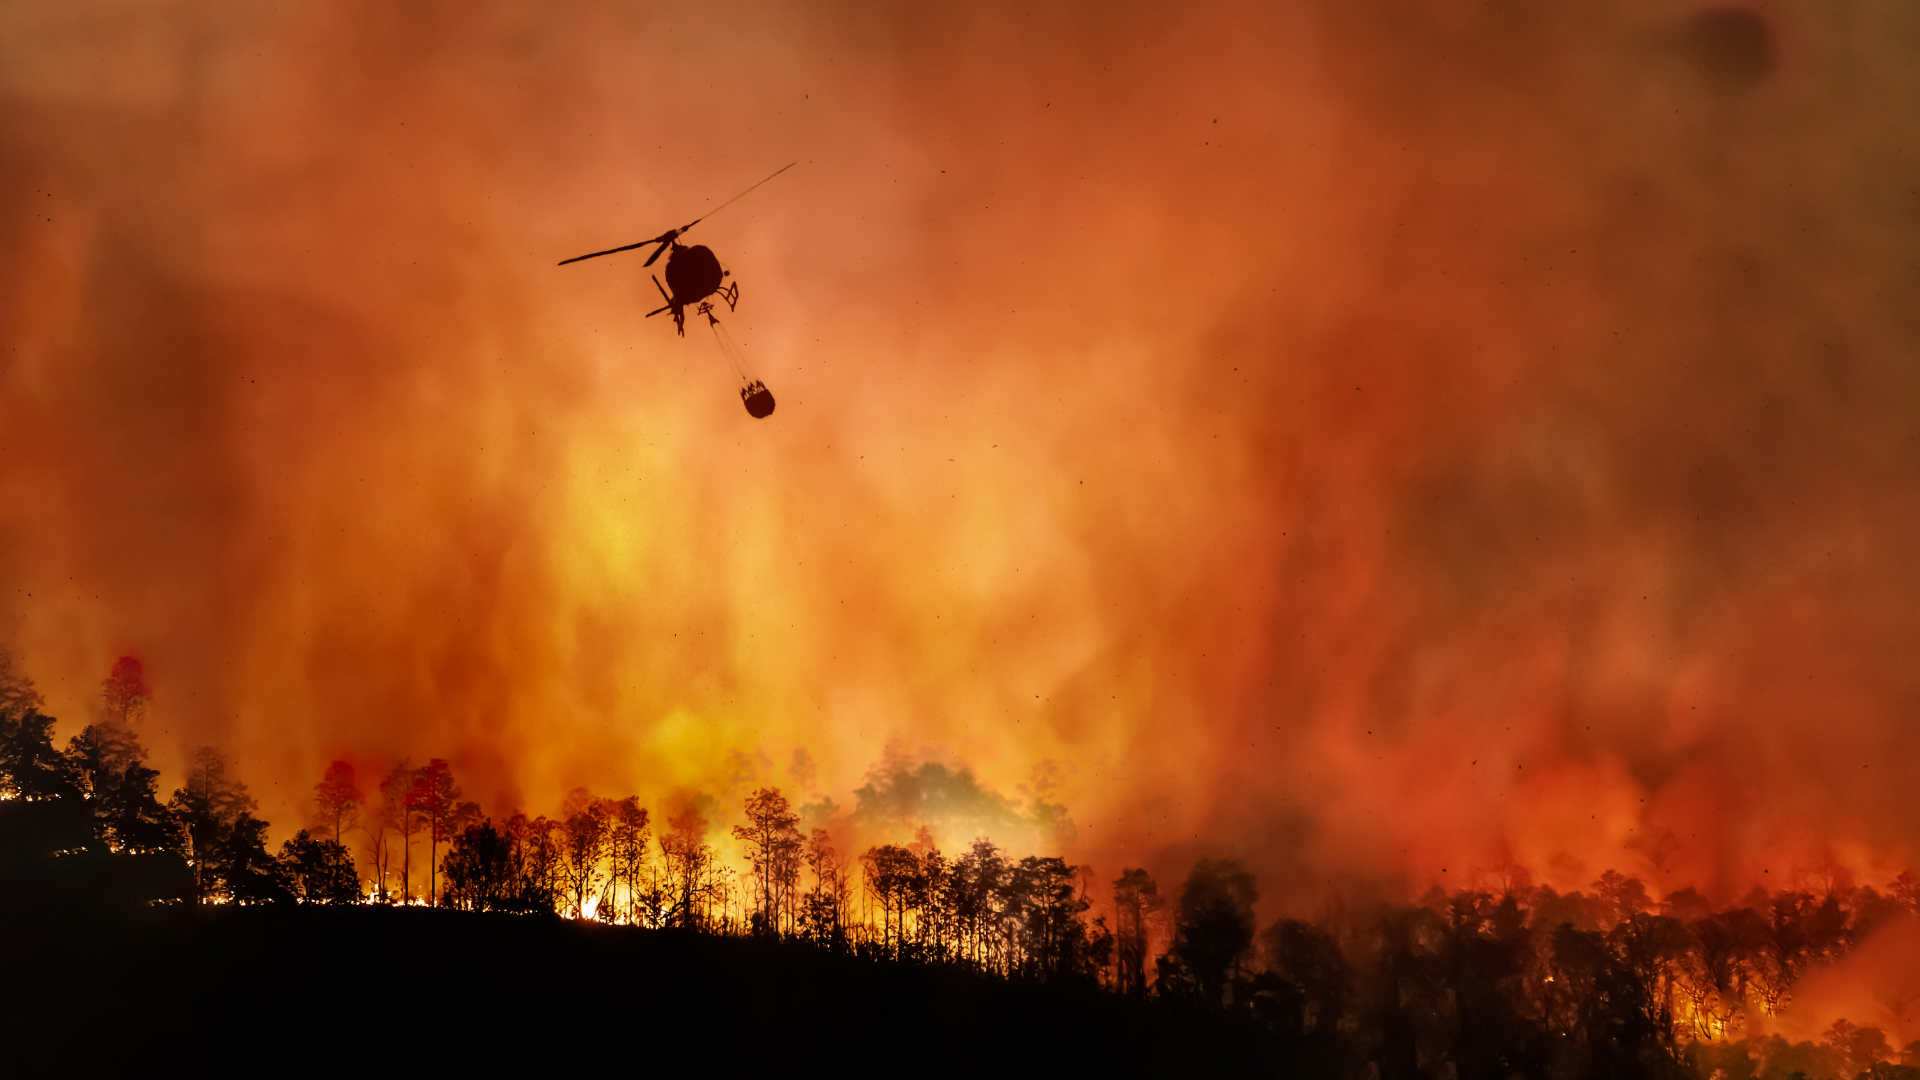 Climate Specialists Cool on the Prediction of Increased Bushfire Insurance Losses